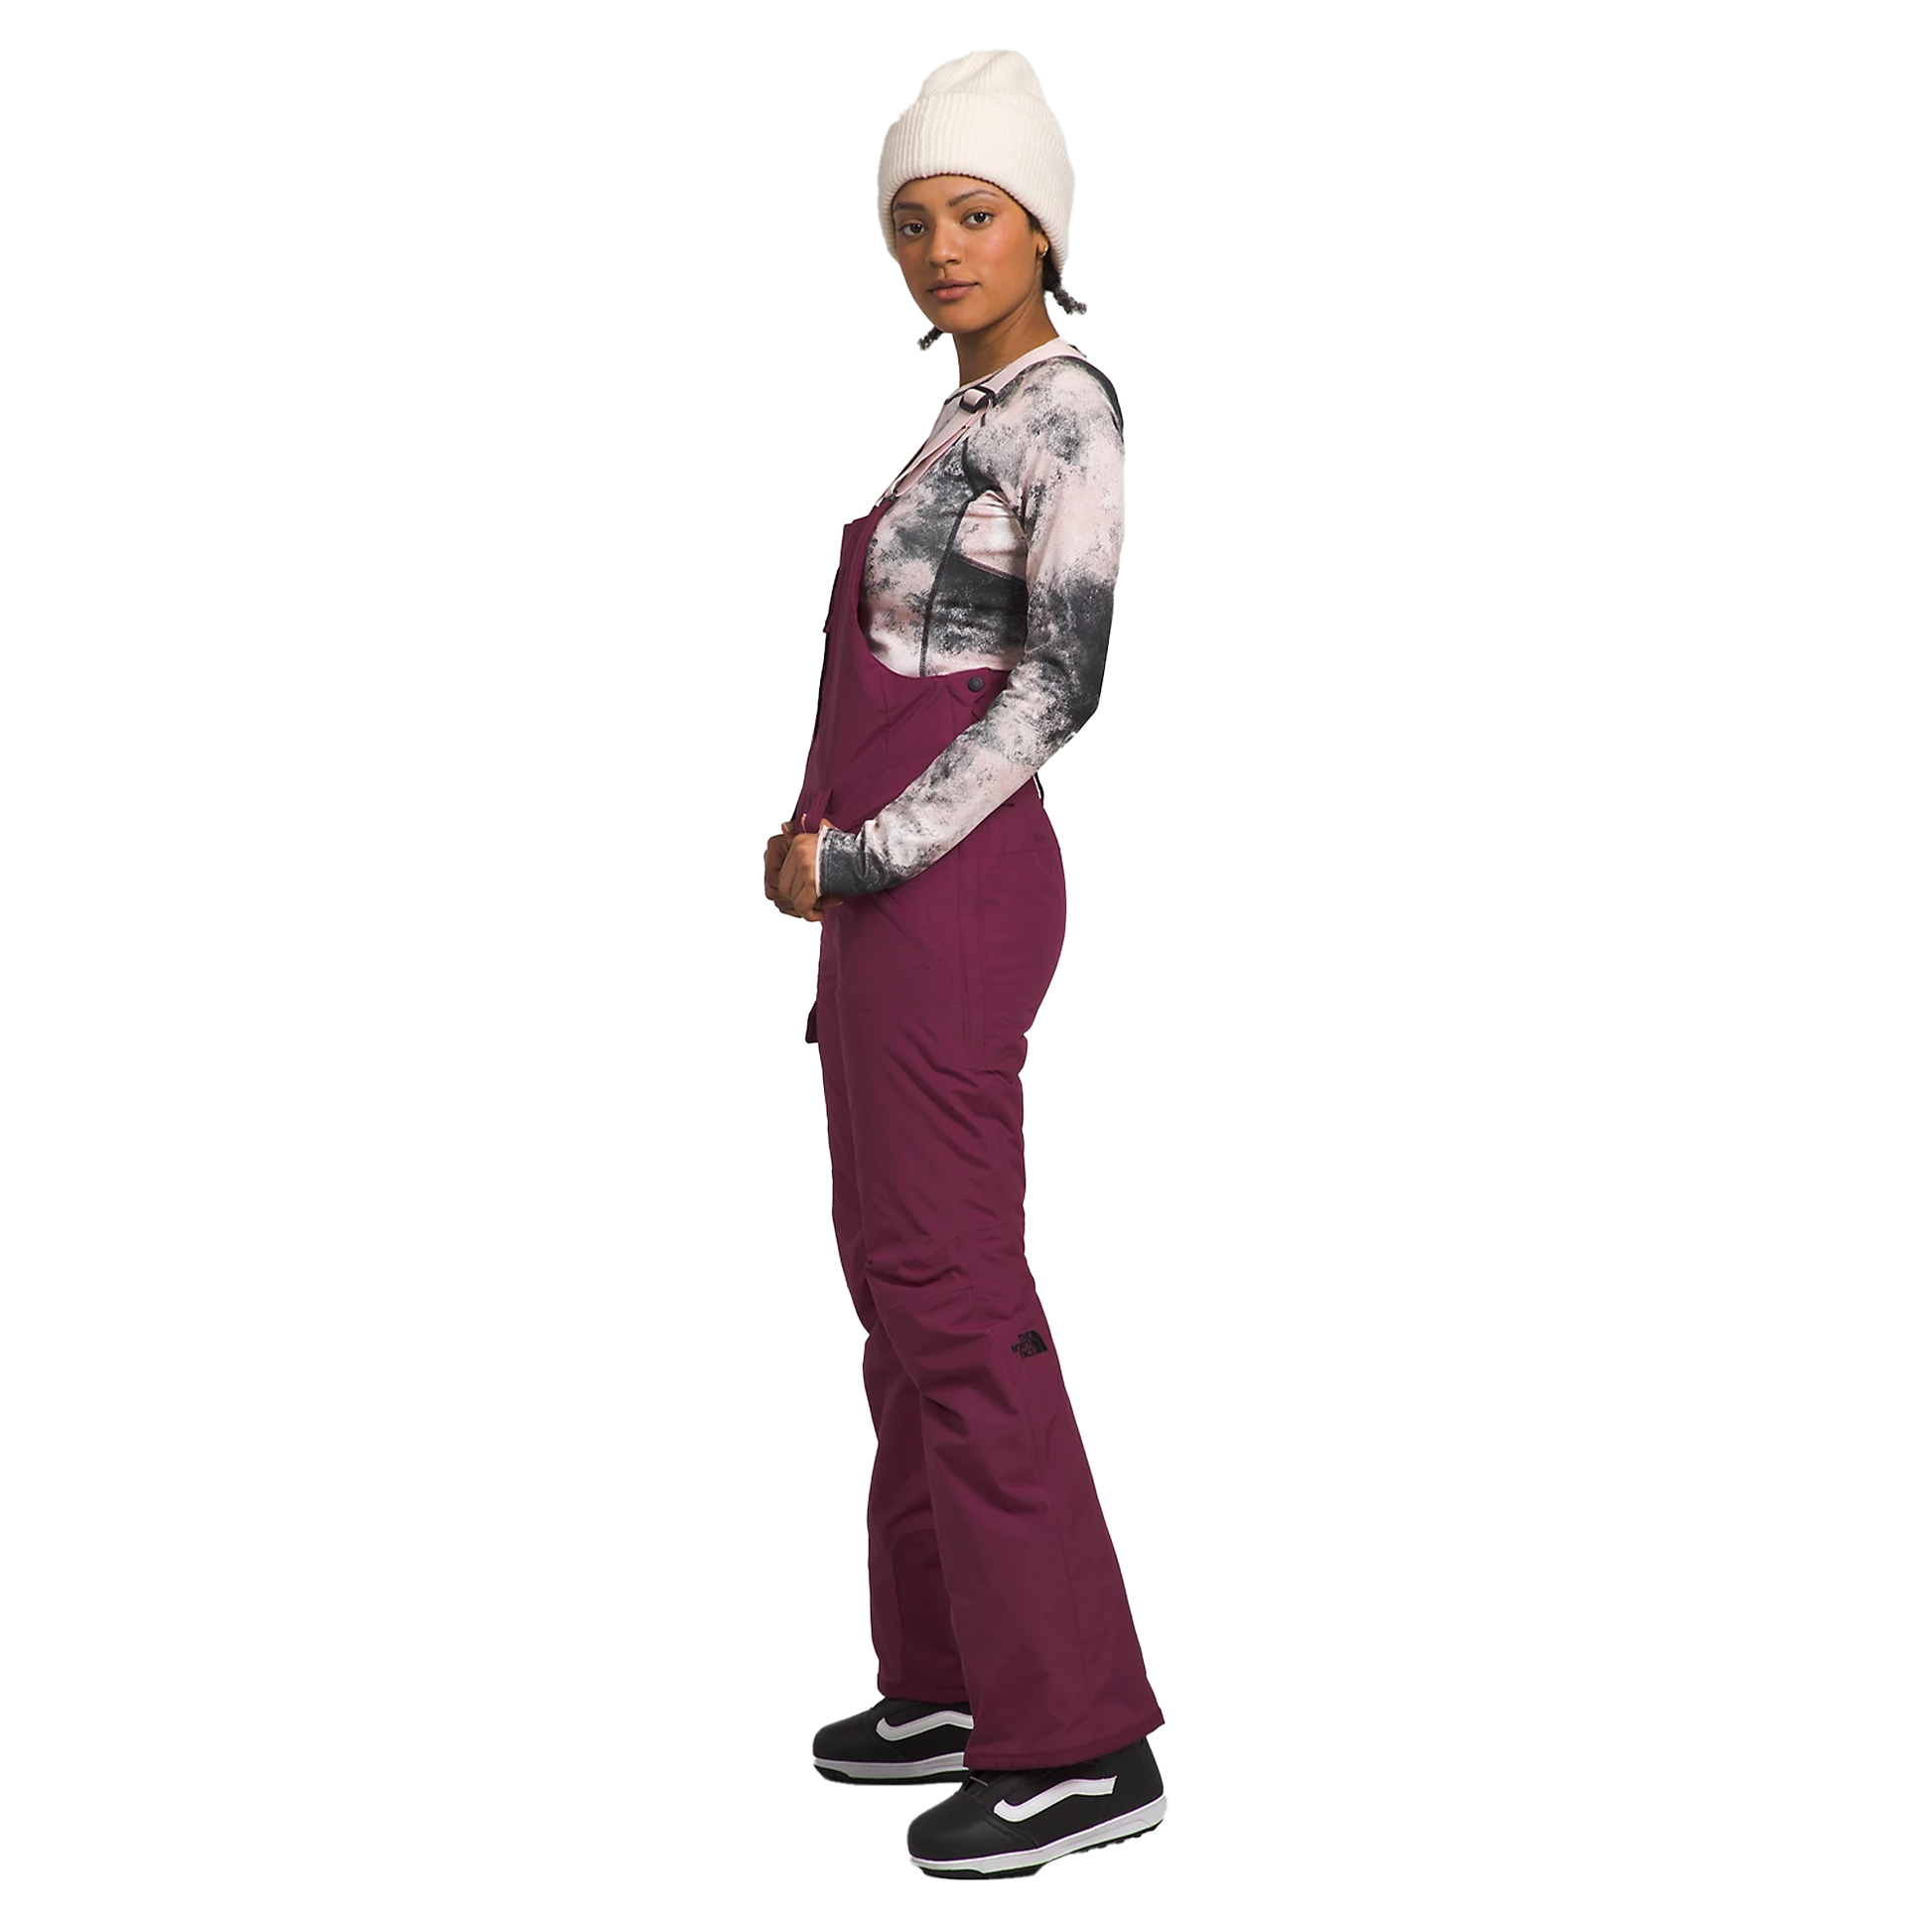 Women's Freedom Bib Pant, The North Face